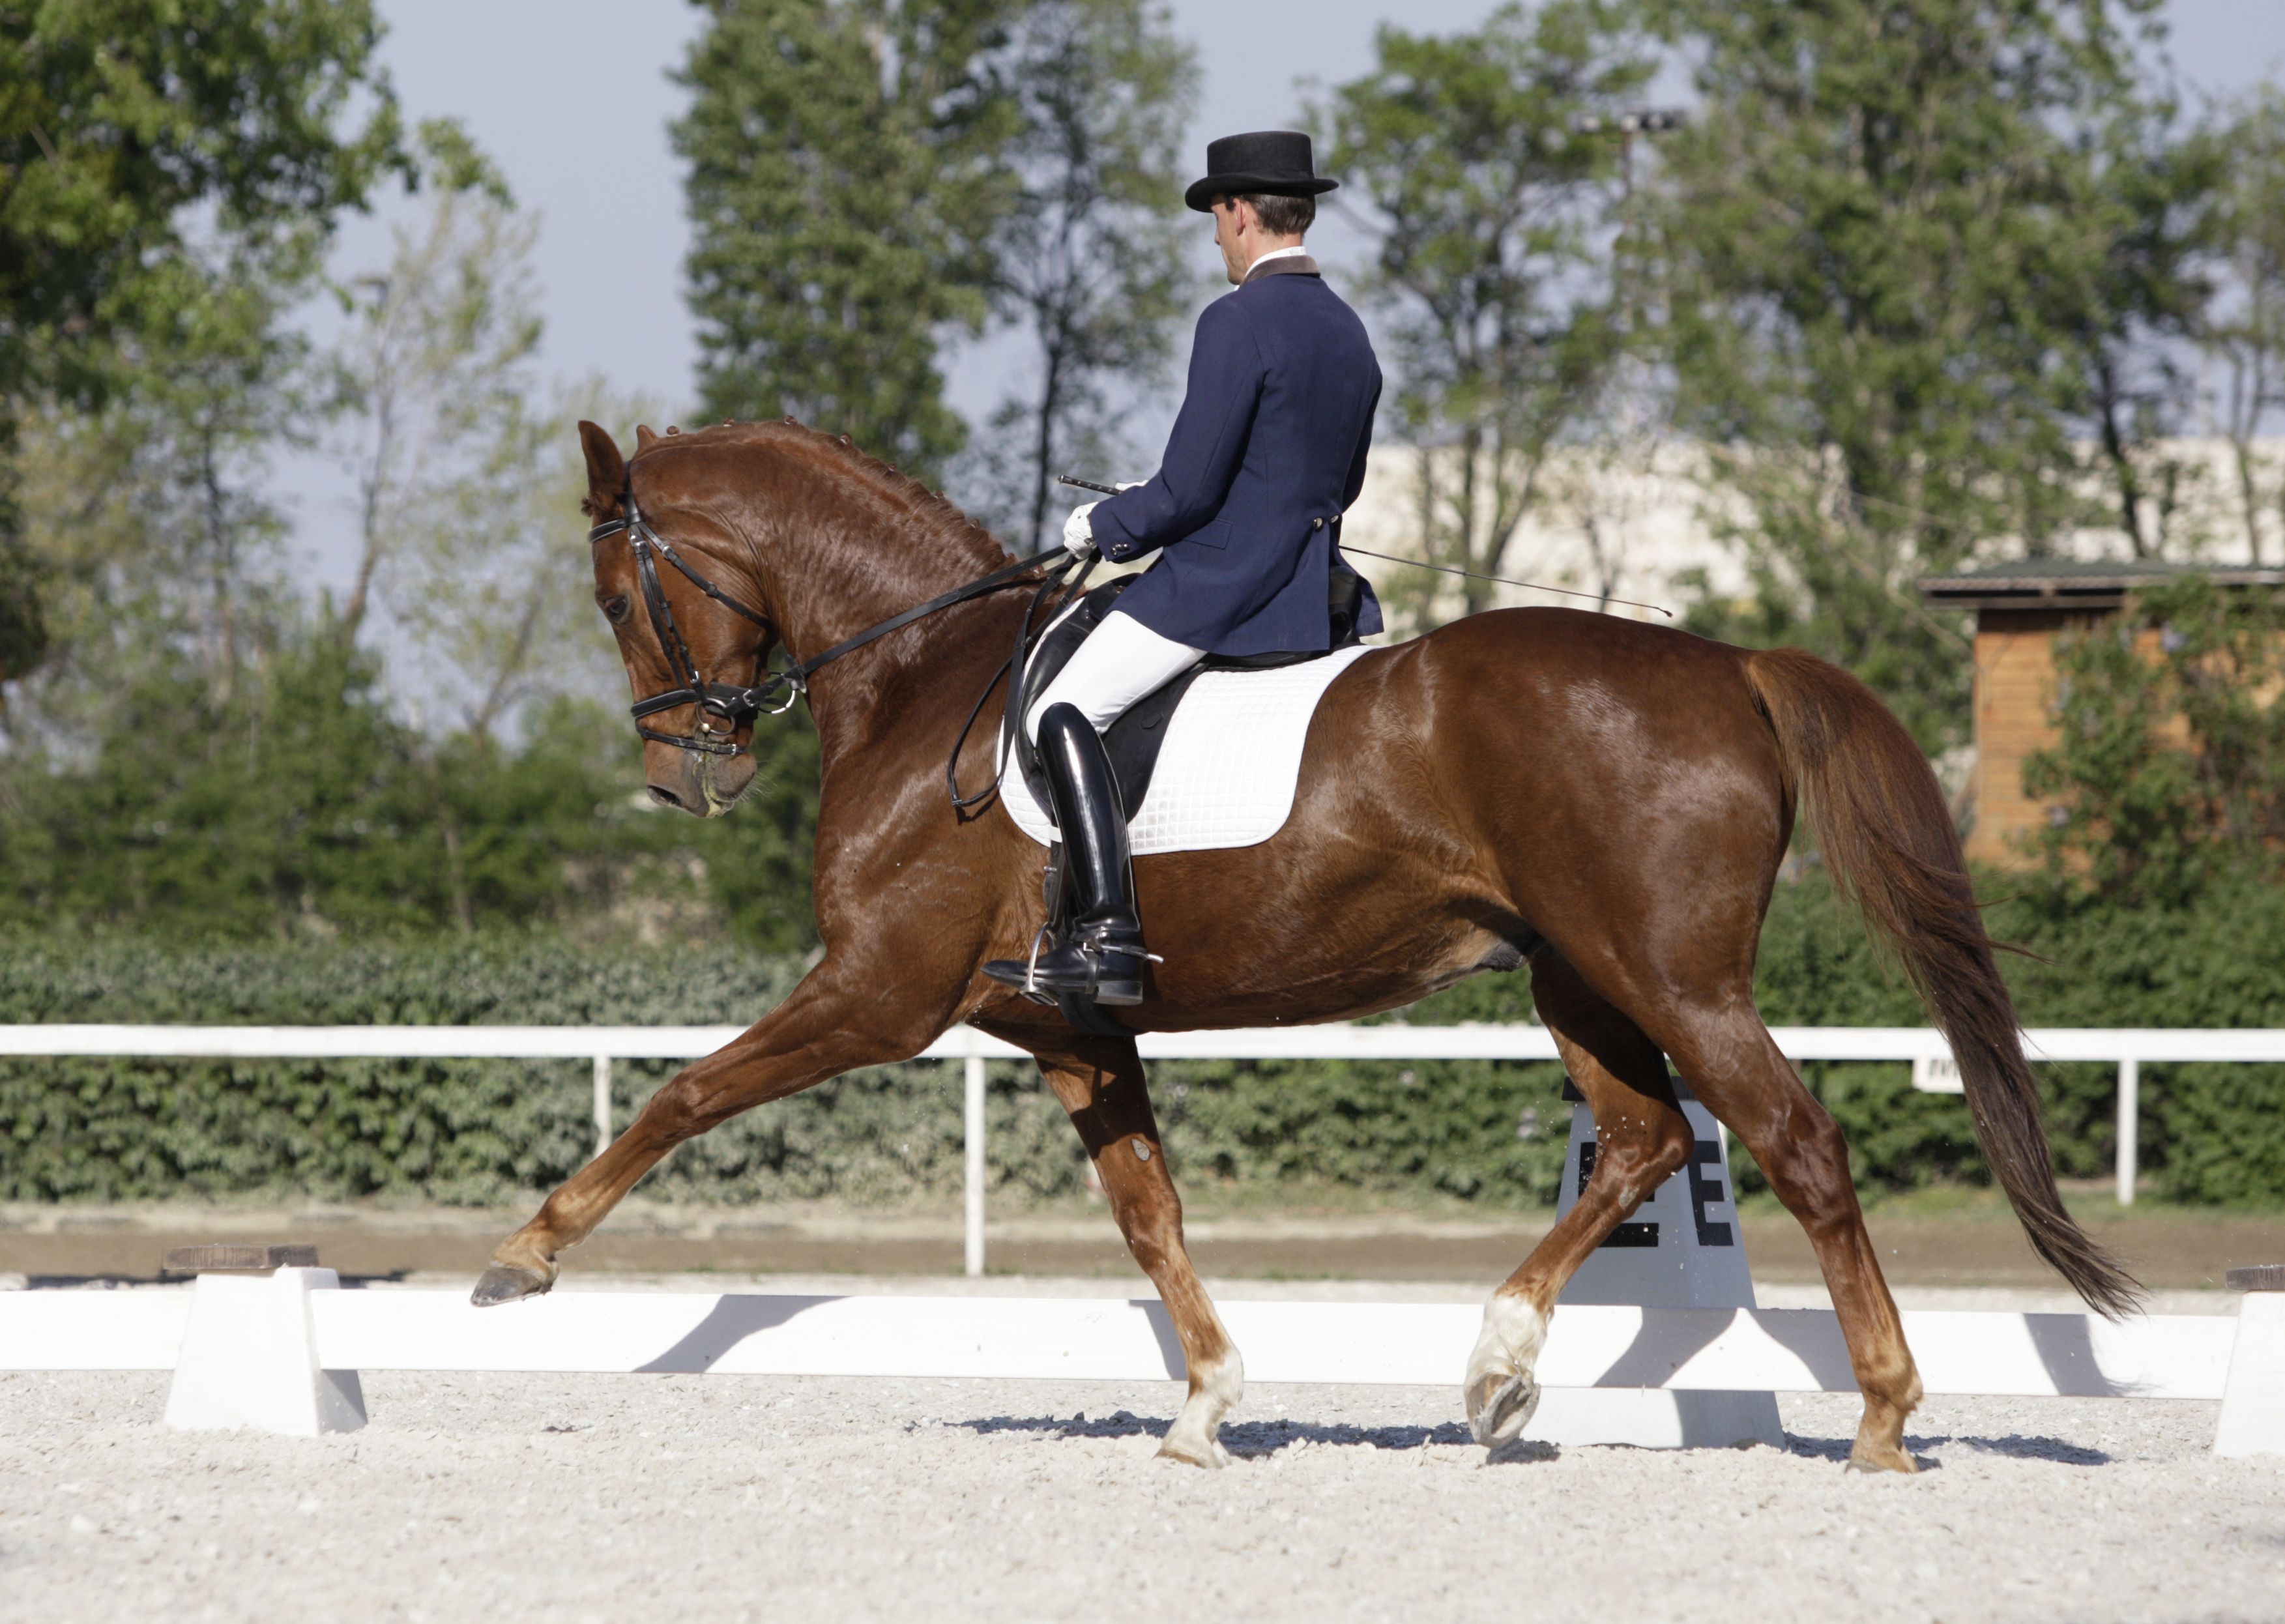 Extended trot during dressage test